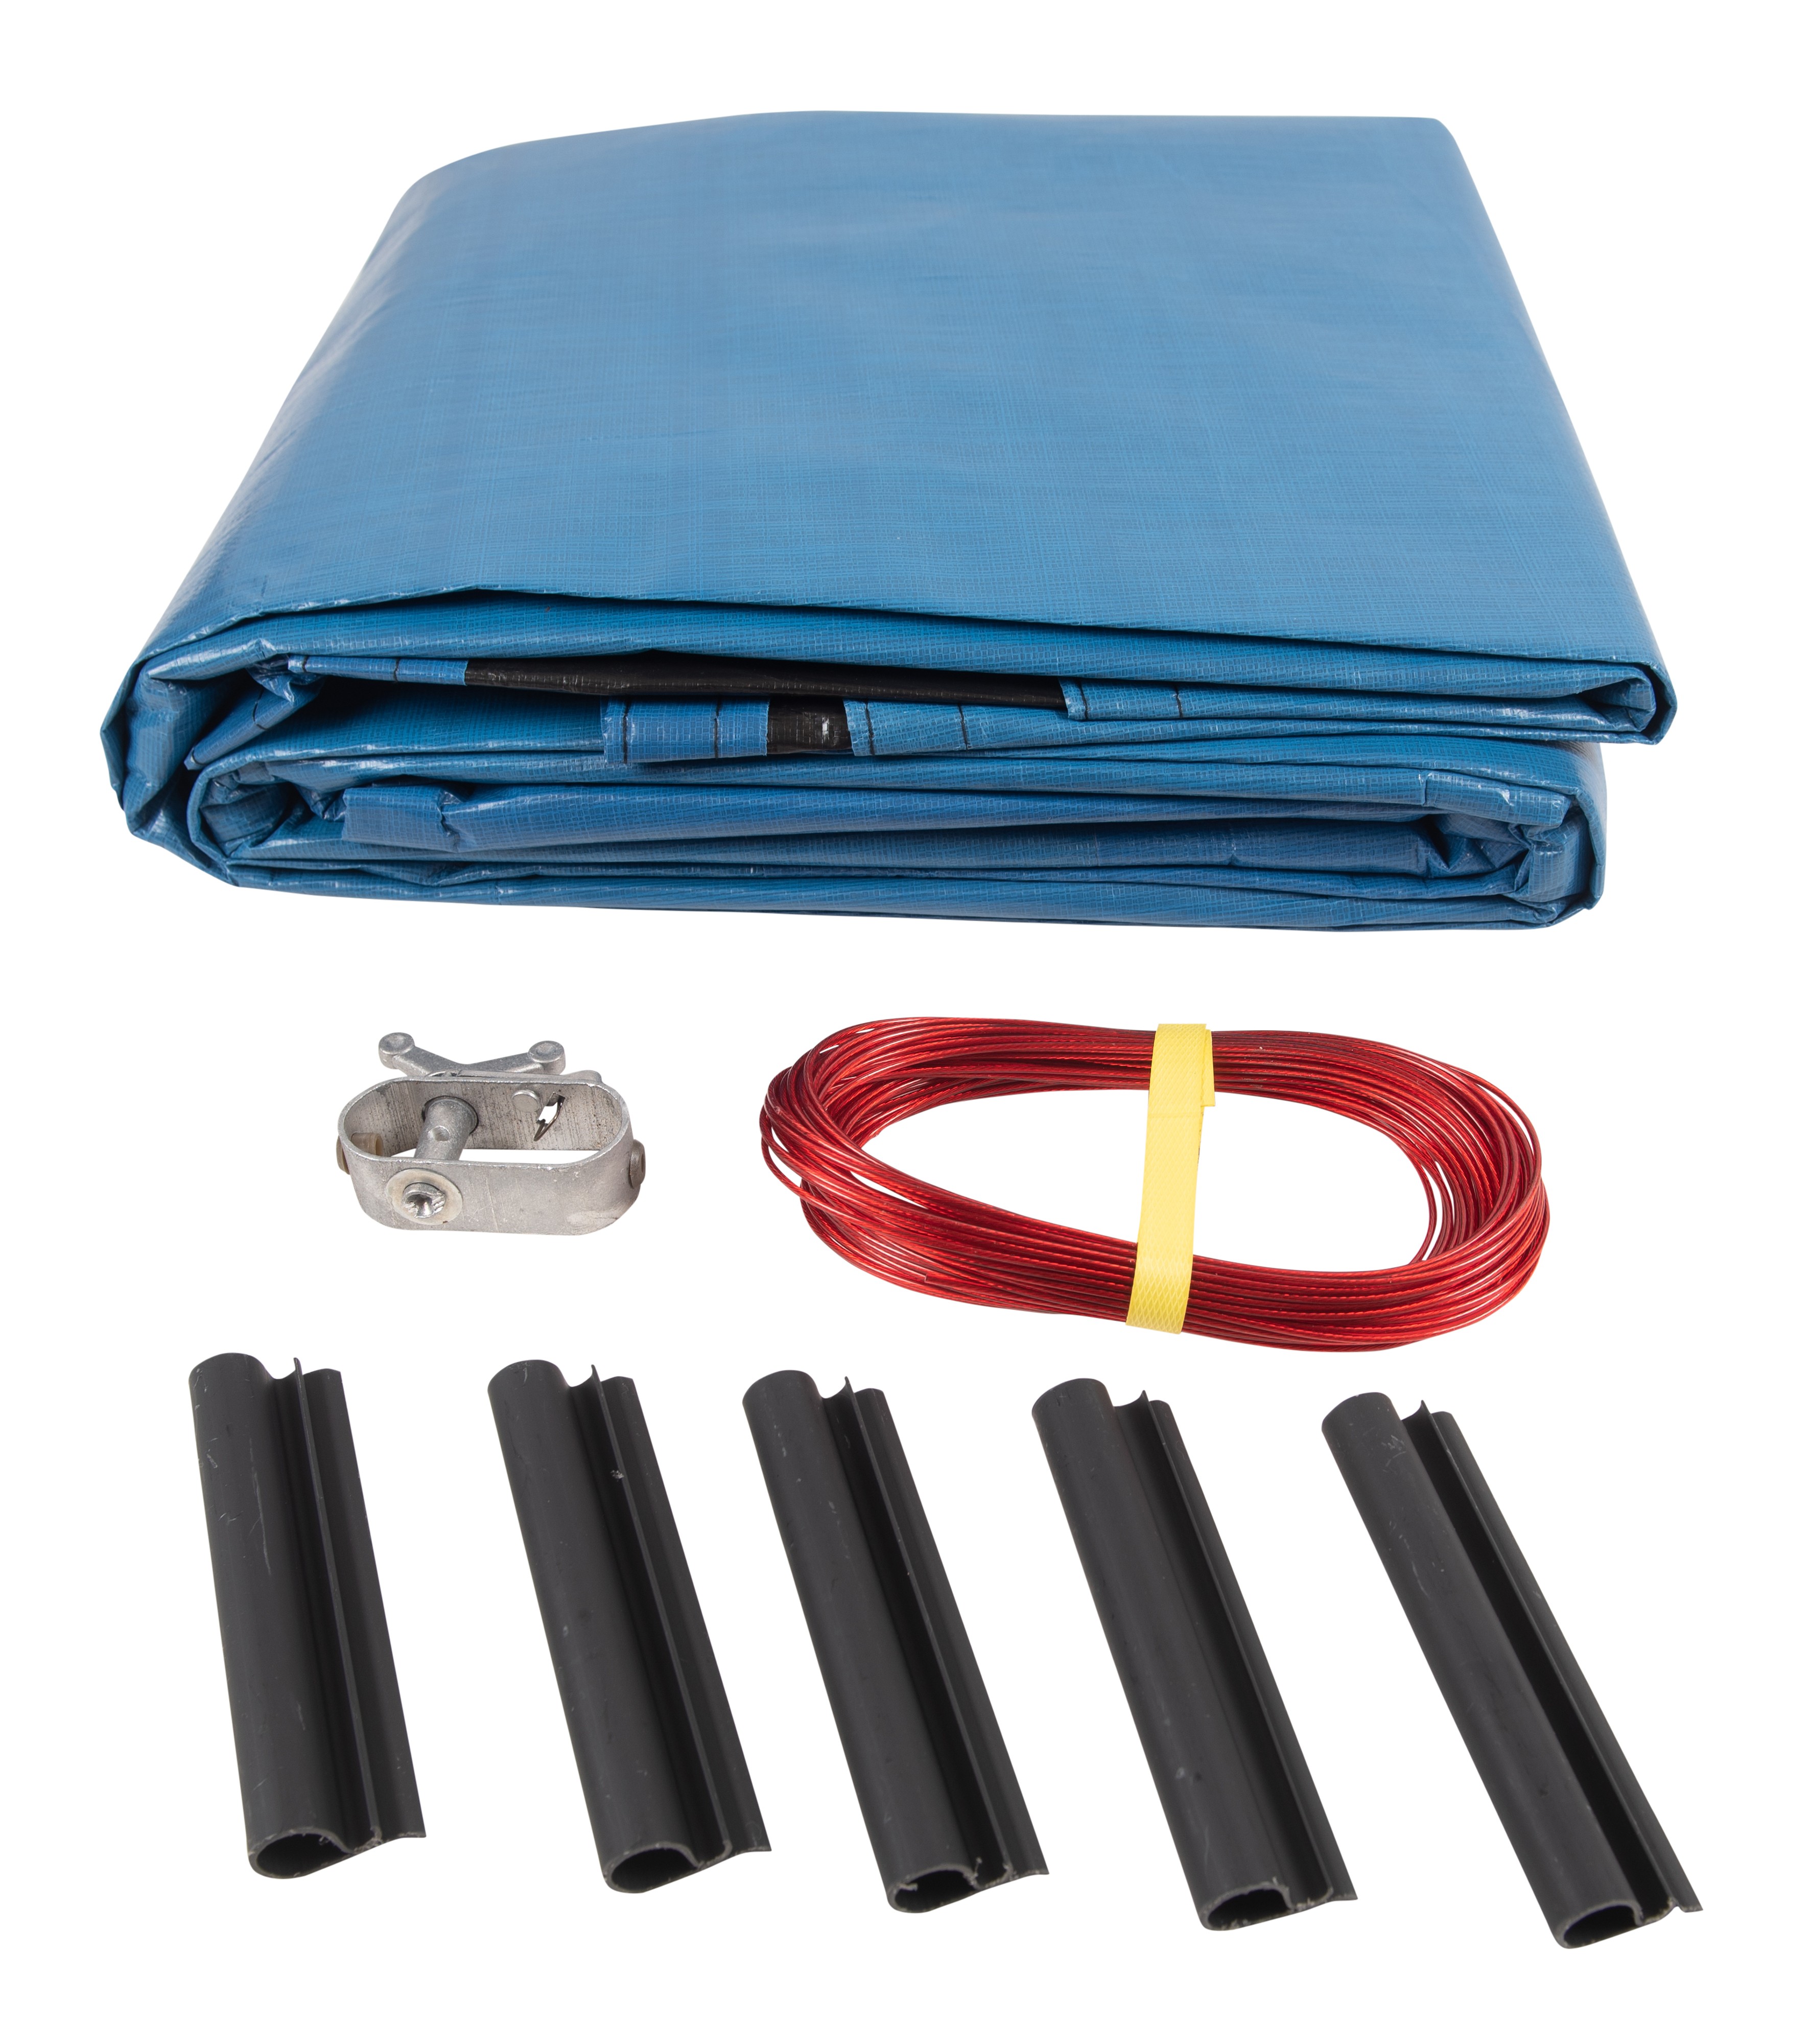 SET SunSolar Energy Technologies-  Super Duty series Above Ground Solid Pool Cover for 16x28 Foot Oval Swimming Pool - Winter Pool Cover with Sturdy Cable and Winch 15-Yr warranty. Cover Clips Included.